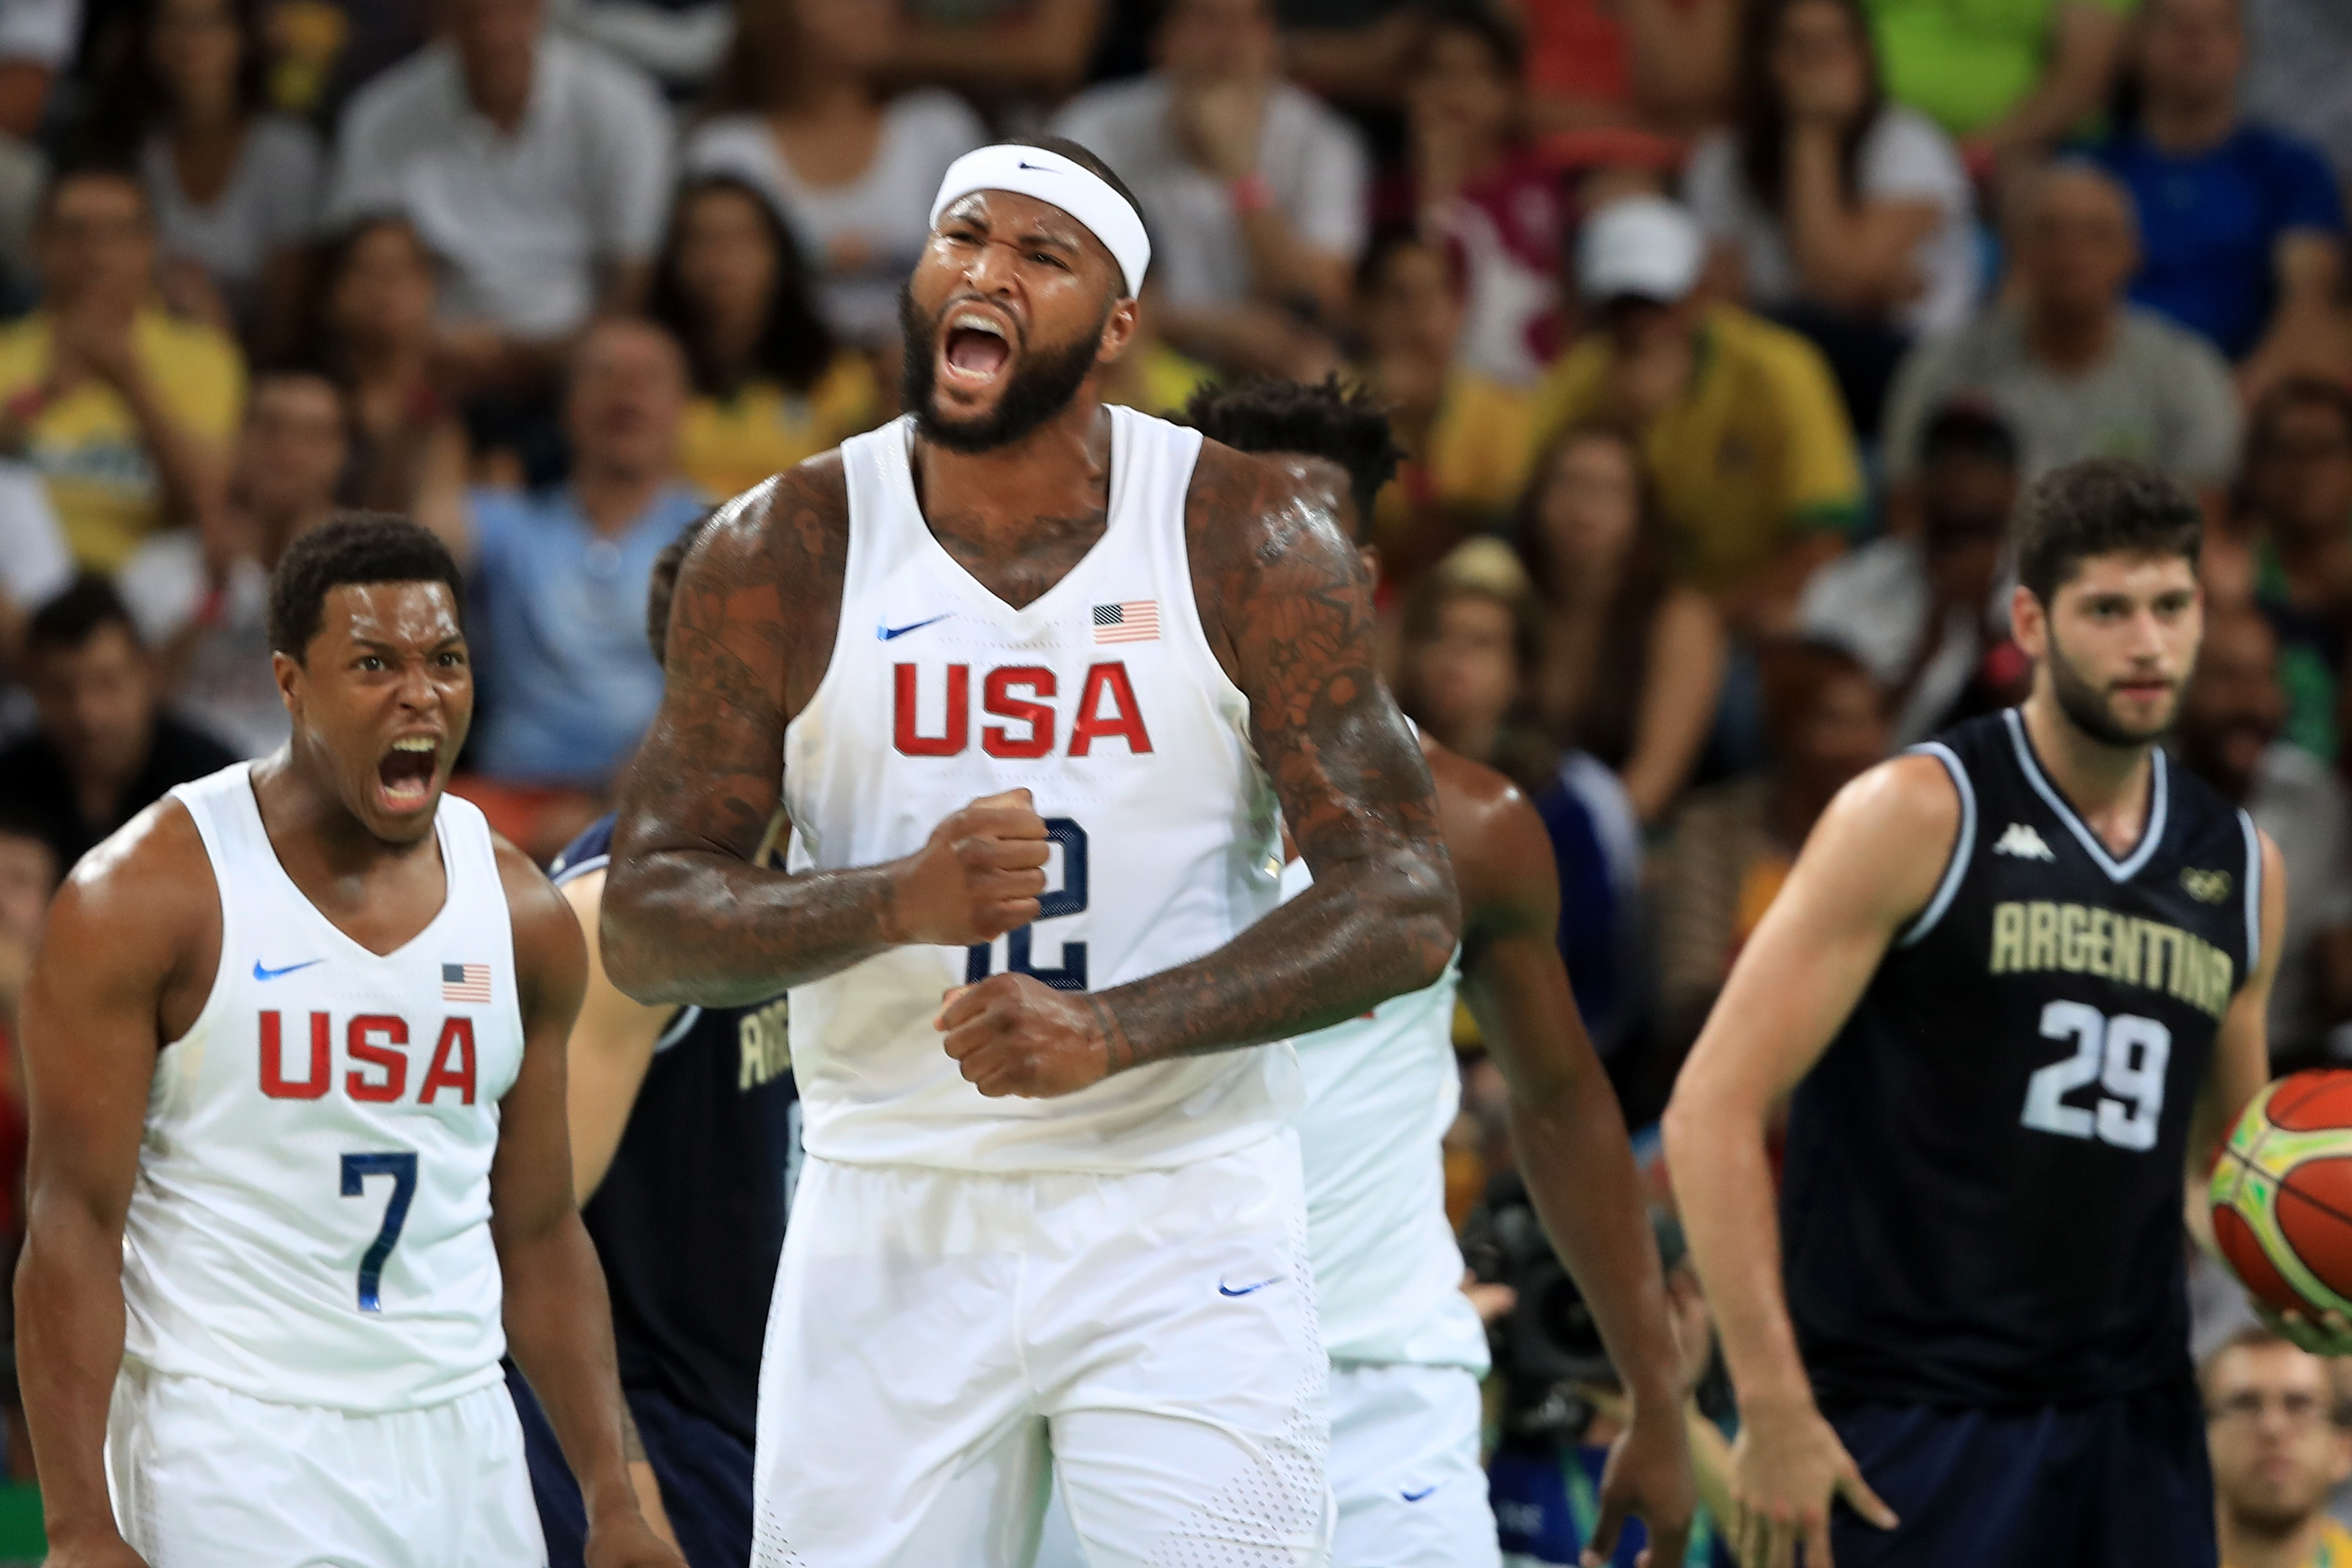 Demarcus Cousins of United States during the Men's Quarterfinal match on Day 12 of the Rio 2016 Olympic Games, on Aug. 17, 2016. (Sam Greenwood—Getty Images)